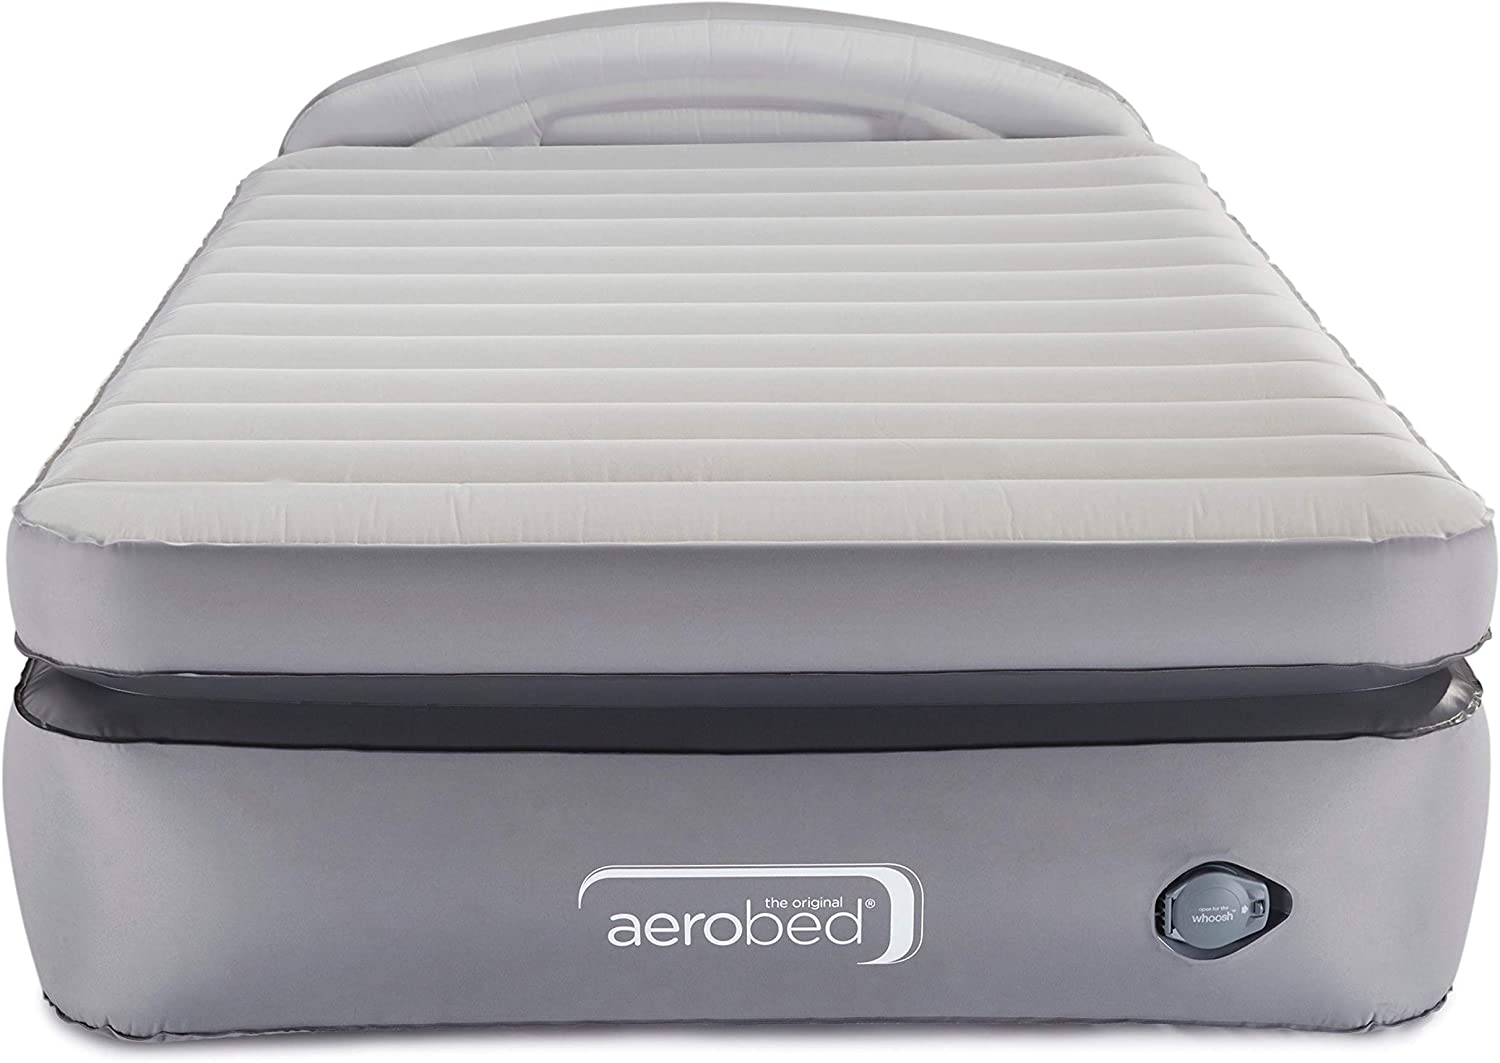 AeroBed Air Mattress with Built-in Pump & Headboard, Full - $119.99 + Free Shipping